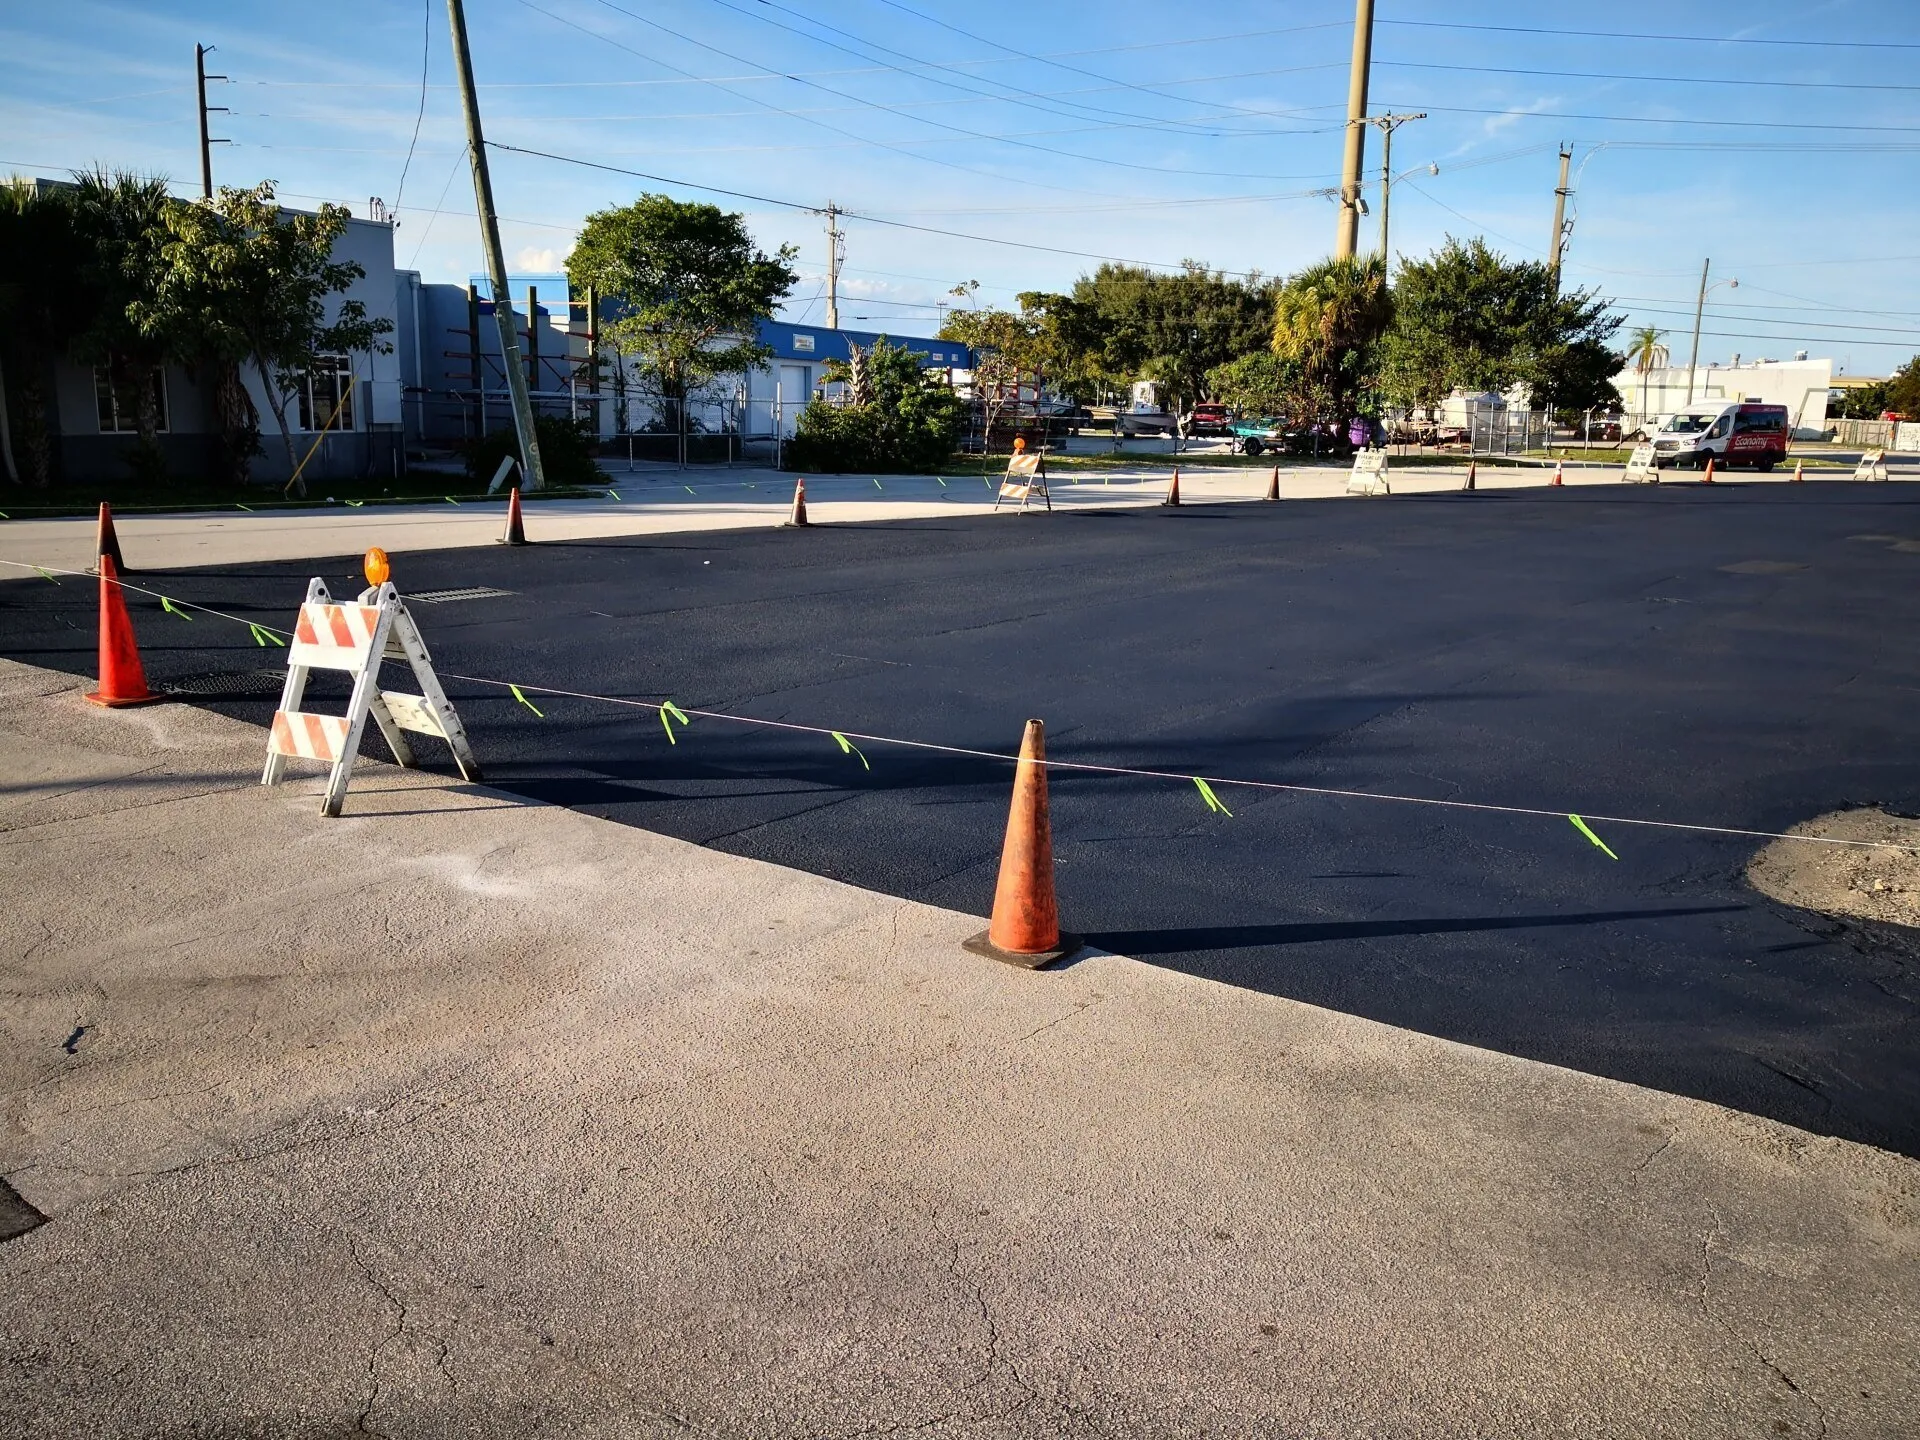 This sealed parking lot helps decrease the chance of long-term damage since the sealer protects the area from weather and water damage.